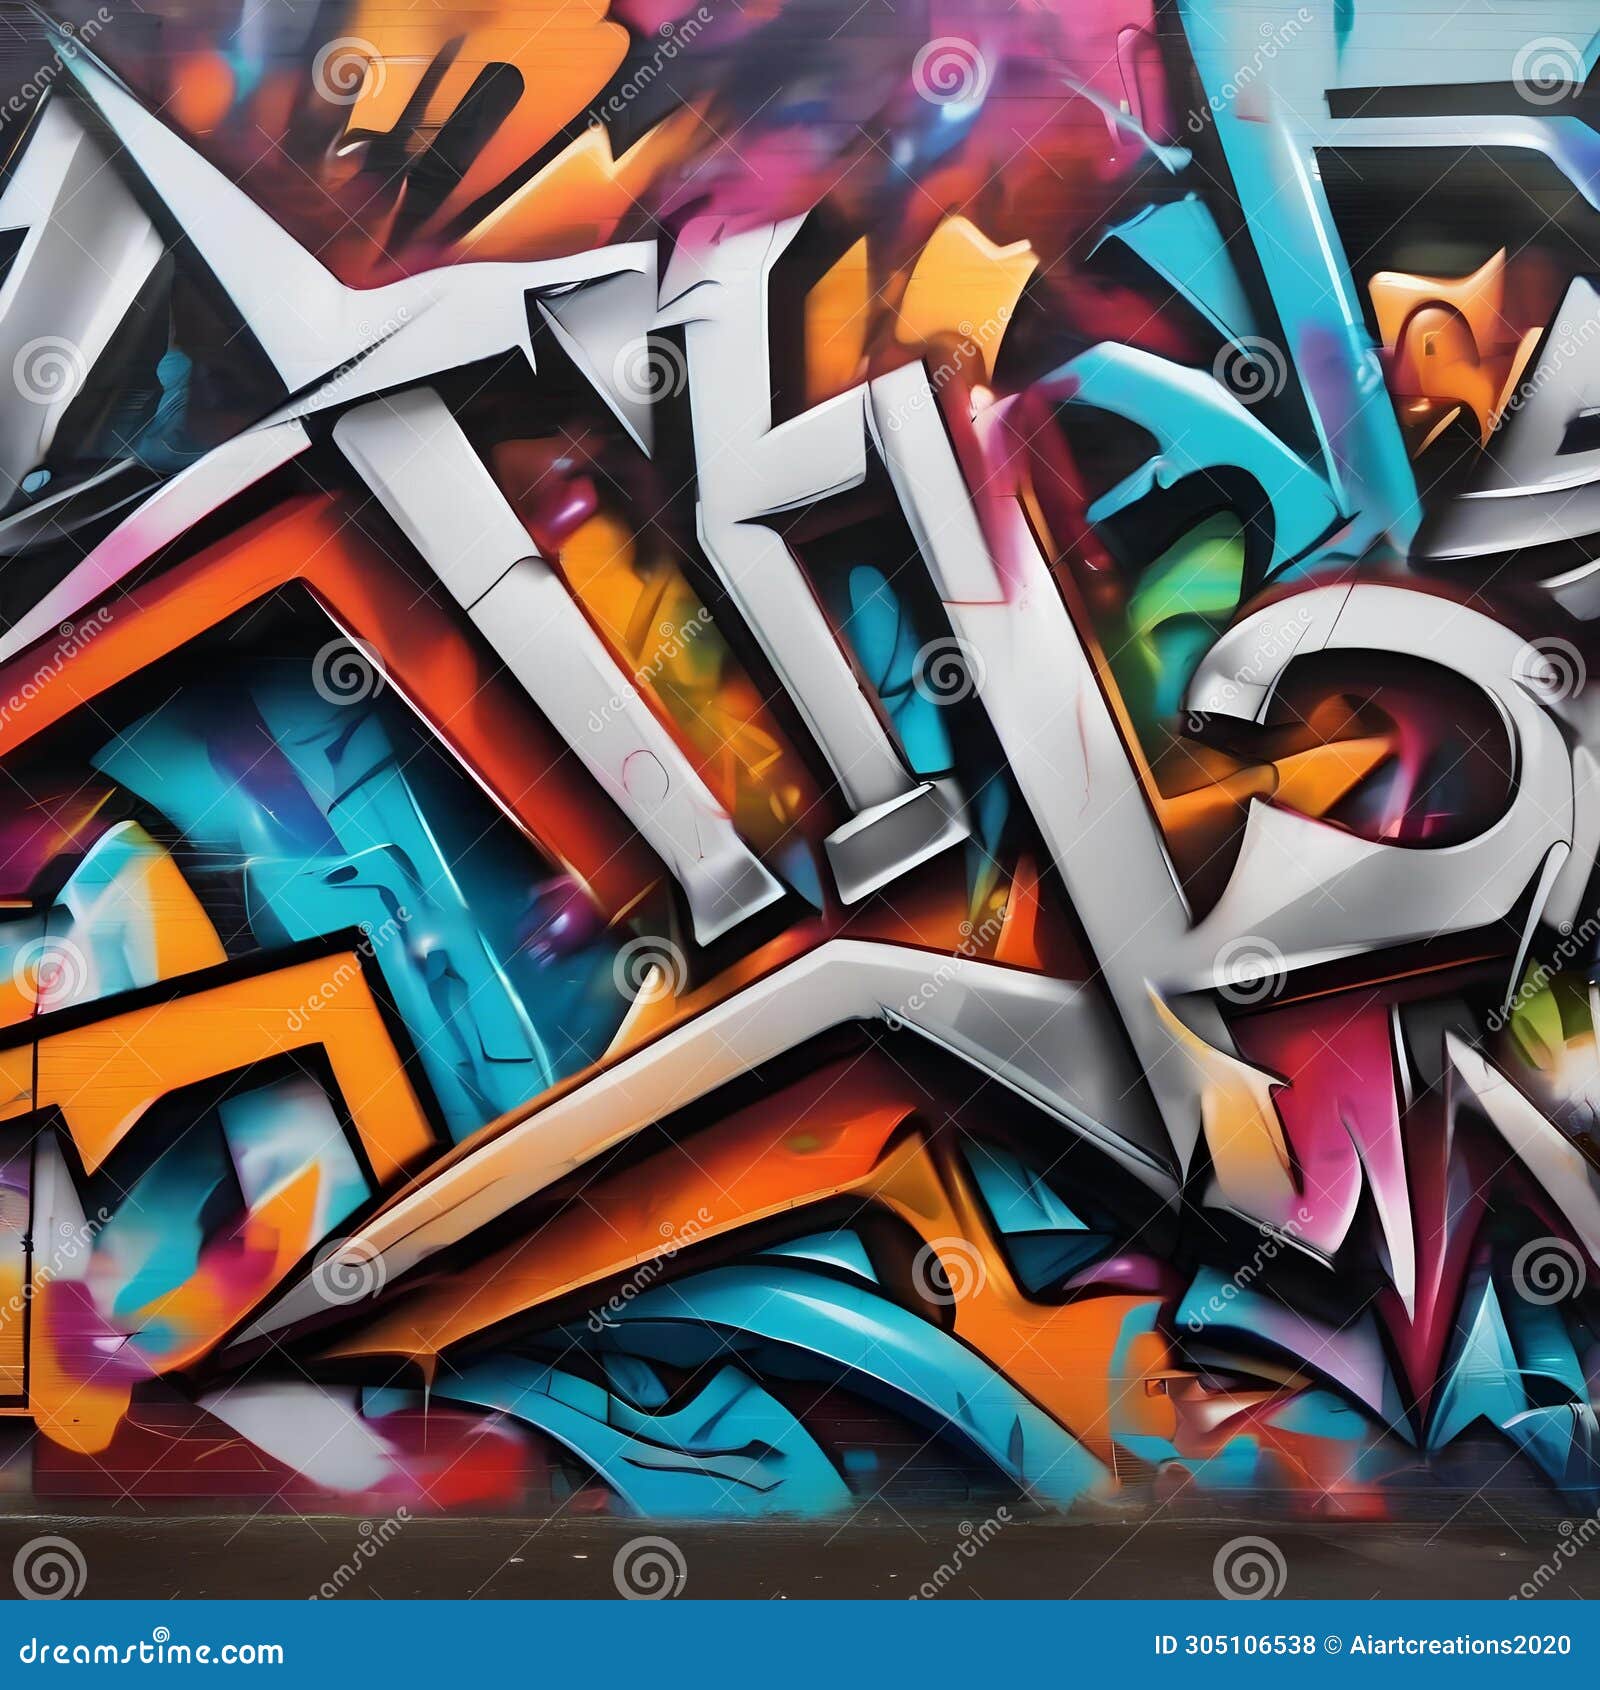 dynamic urban graffiti art graffiti-style letters and vibrant spray-painted colors for an edgy and streetwise look1